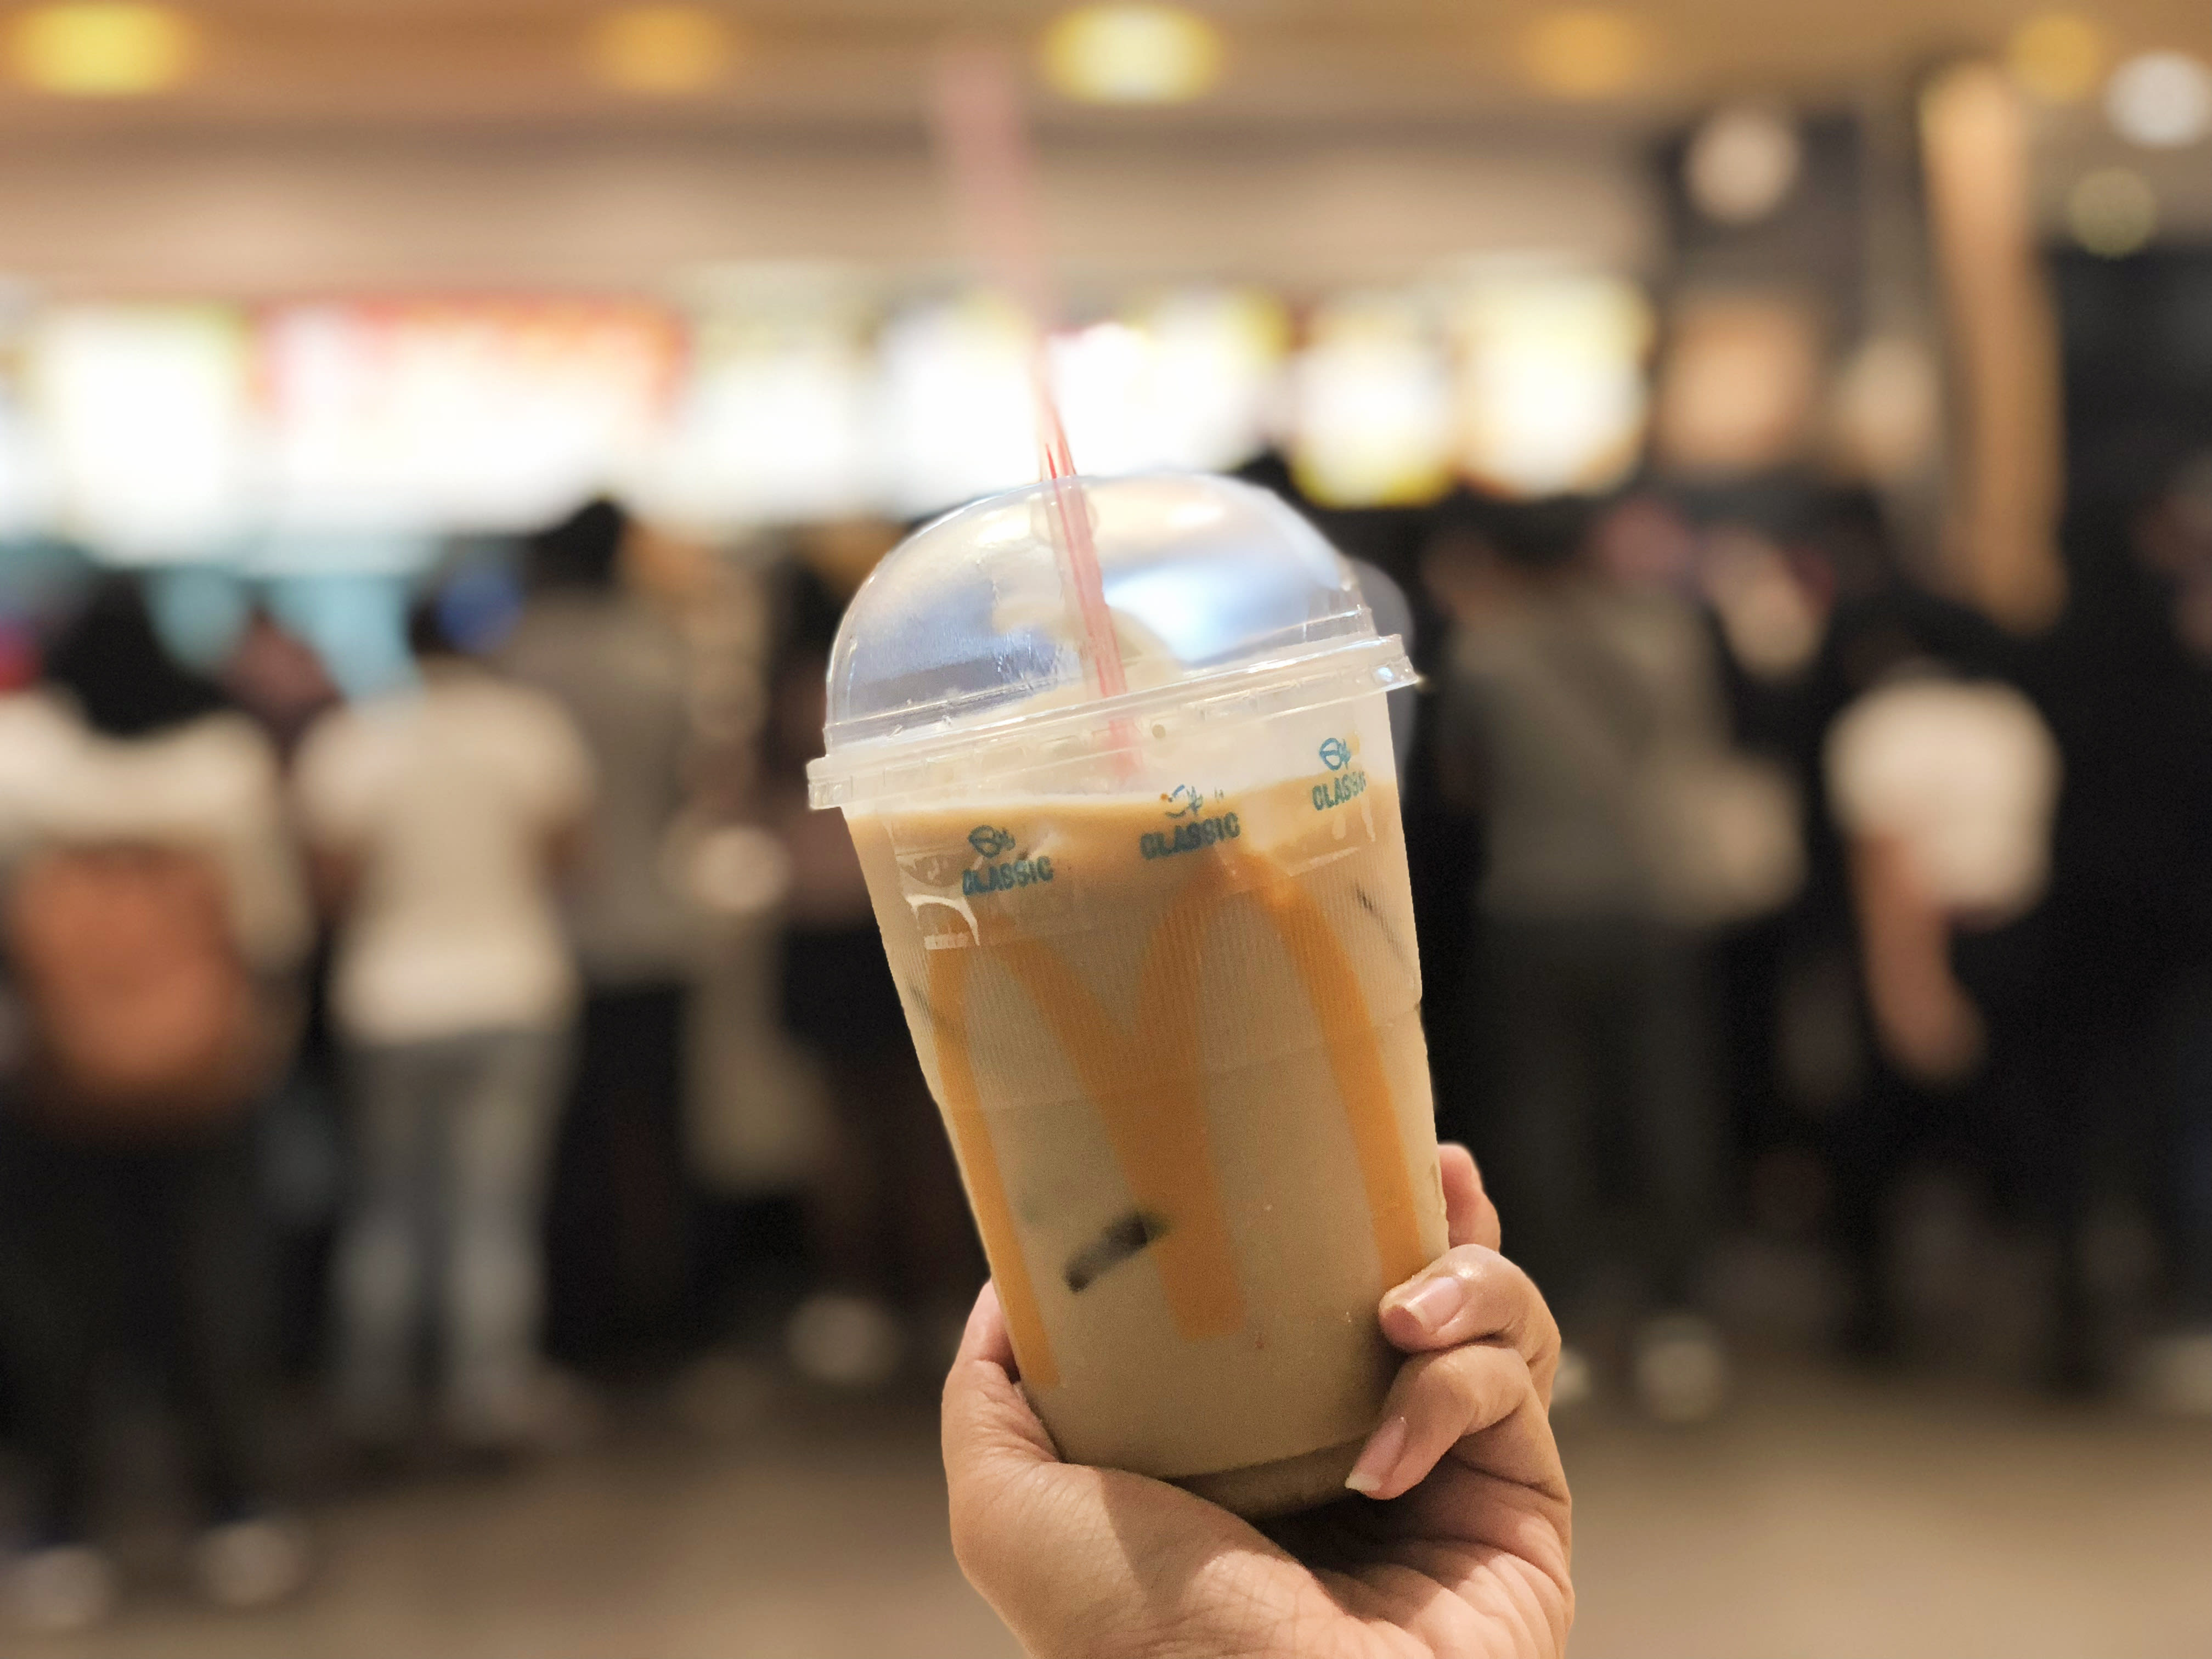 11 Unusual Milk Tea Flavours Around Asia To Step Up Your Boba Game - Klook Blog4032 x 3024